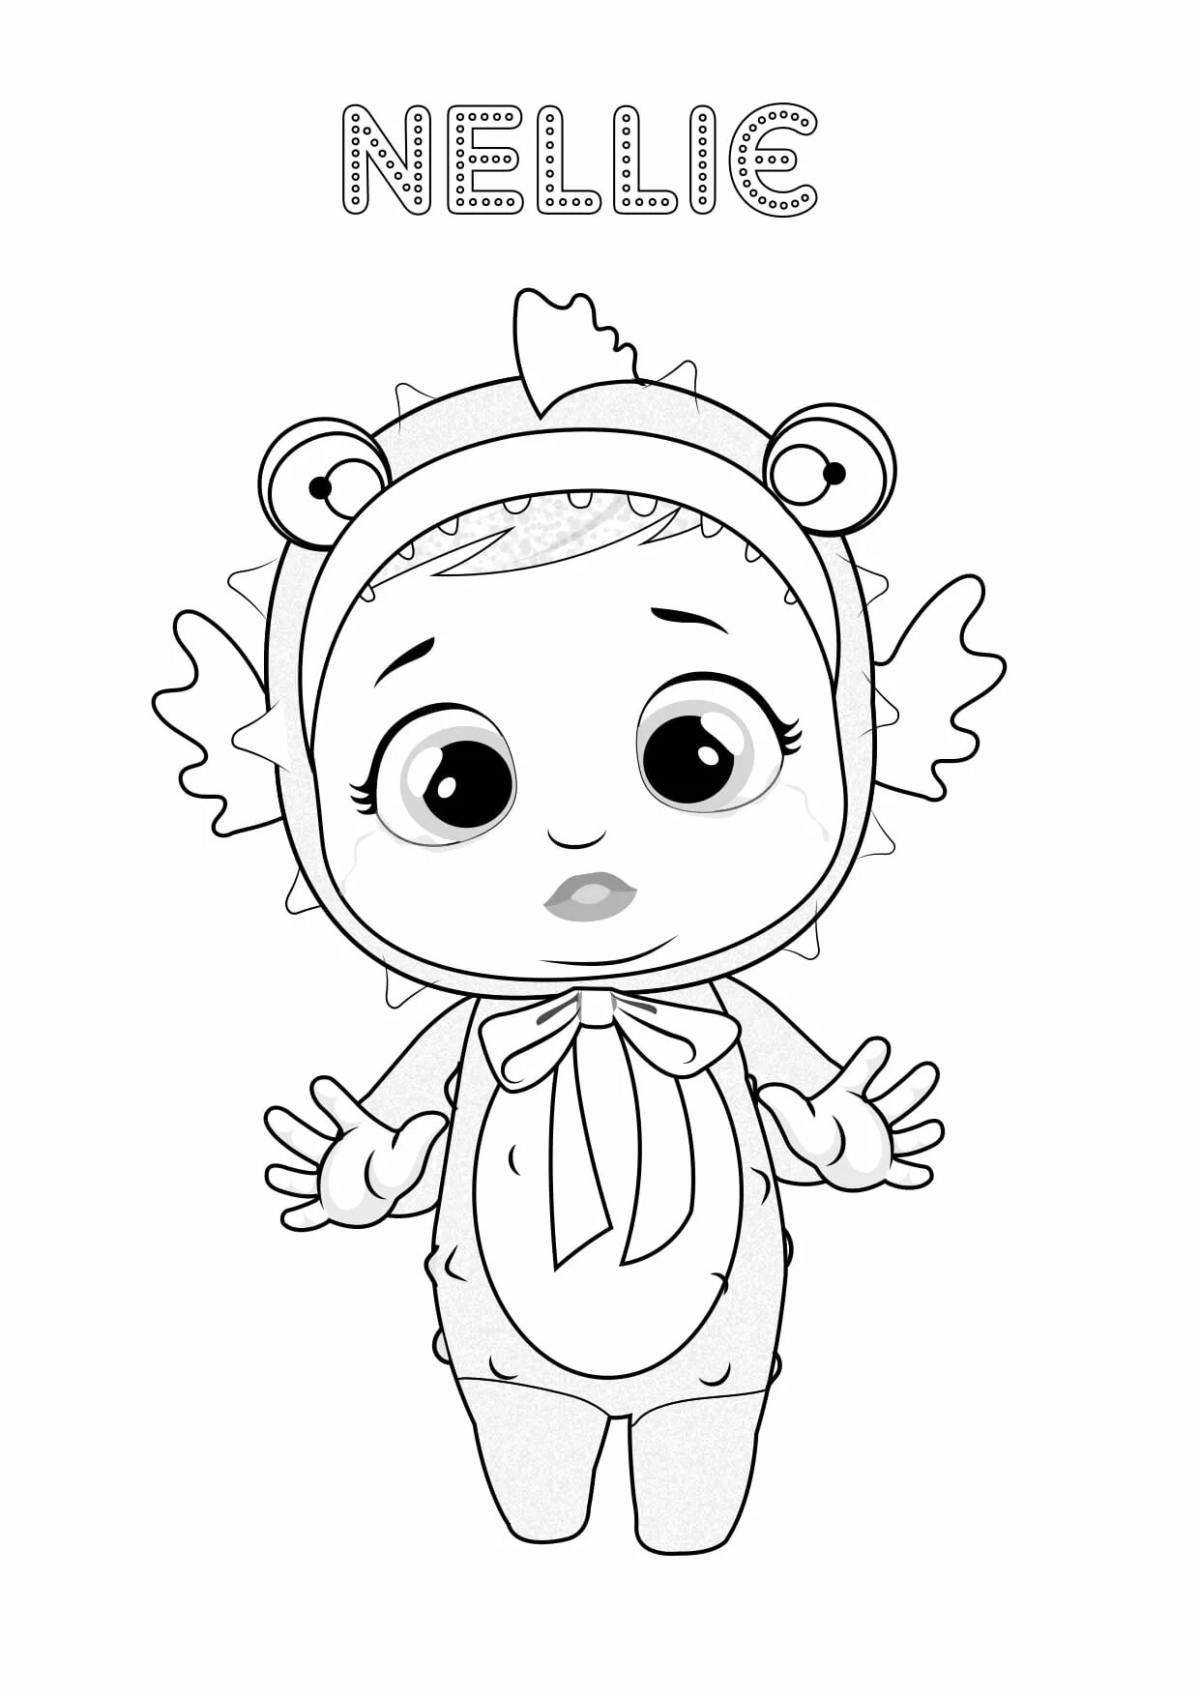 Color-explosion edge baby coloring page